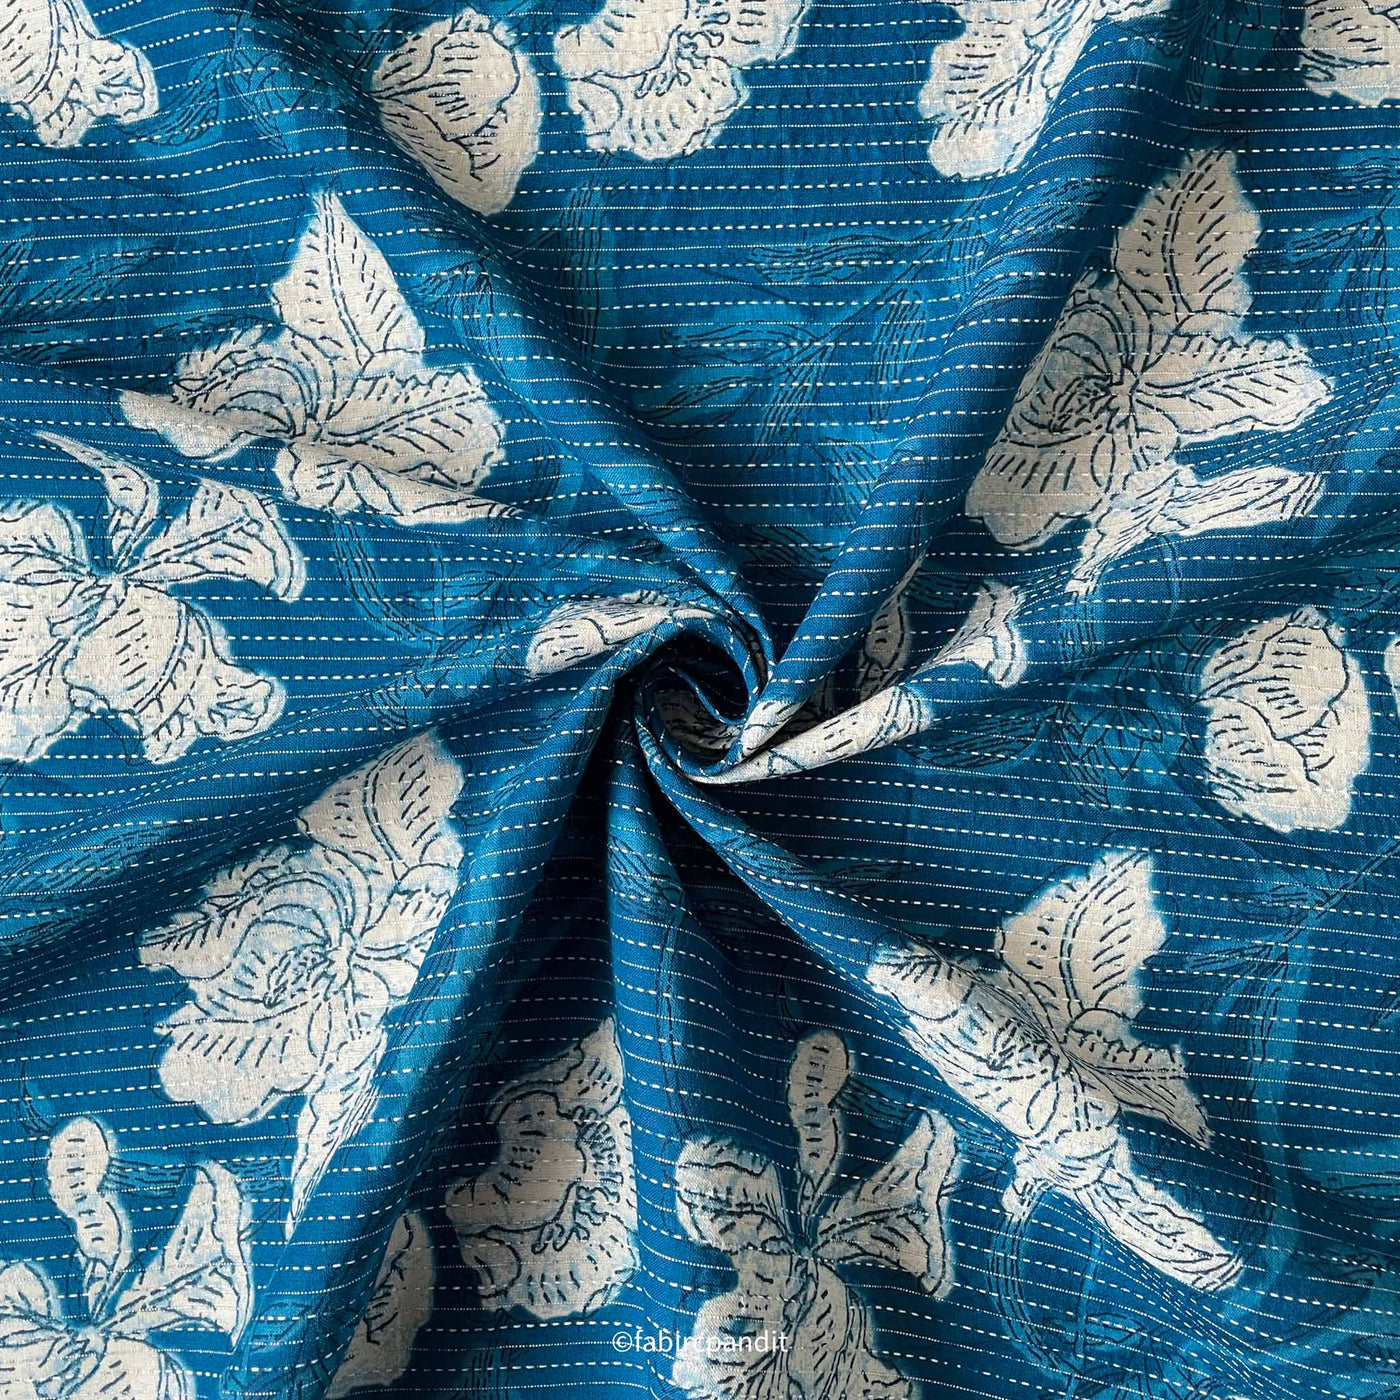 Fabric Pandit Cut Piece (Cut Piece) Indigo Blue and White Abstract Floral Hand Block Printed Kantha Pure Cotton Fabric (Width 43 inches)